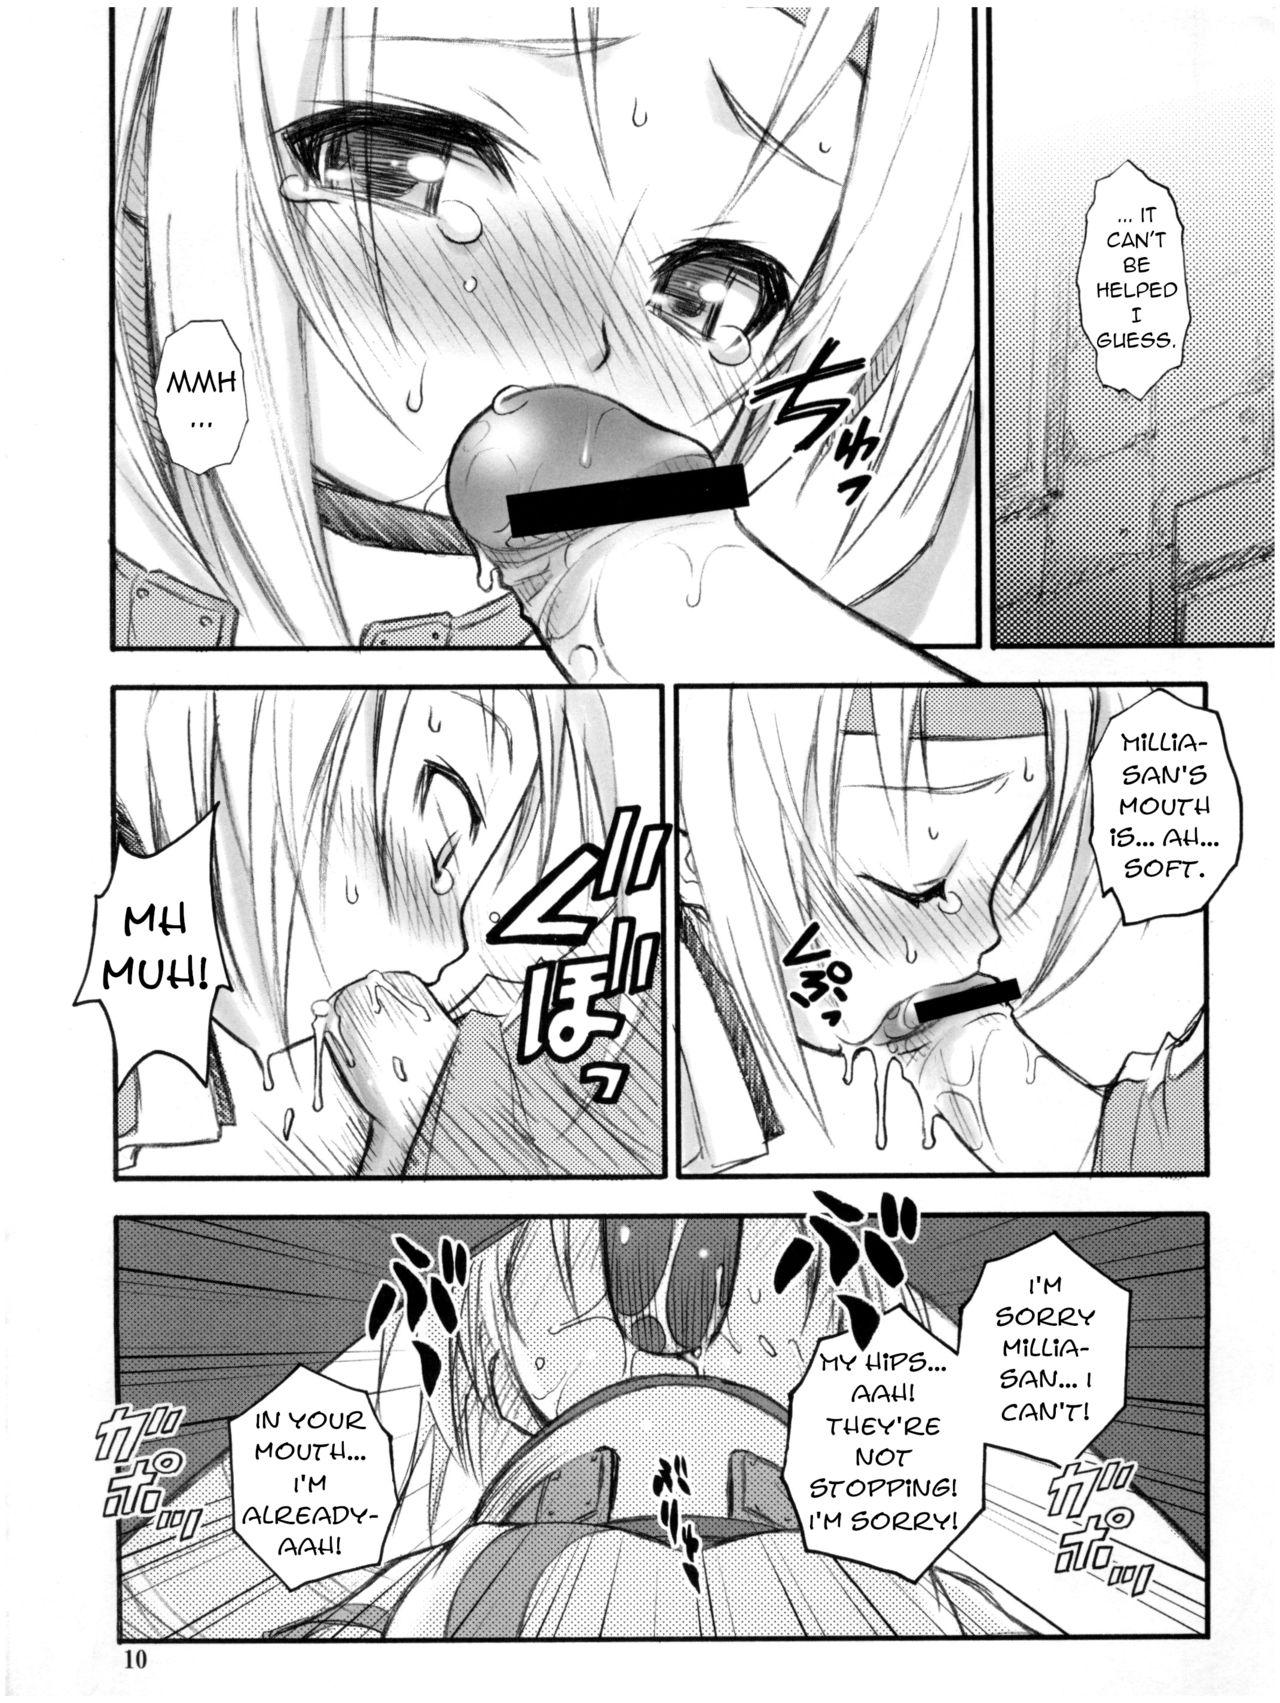 Female Domination Anone. - Guilty gear Pool - Page 10